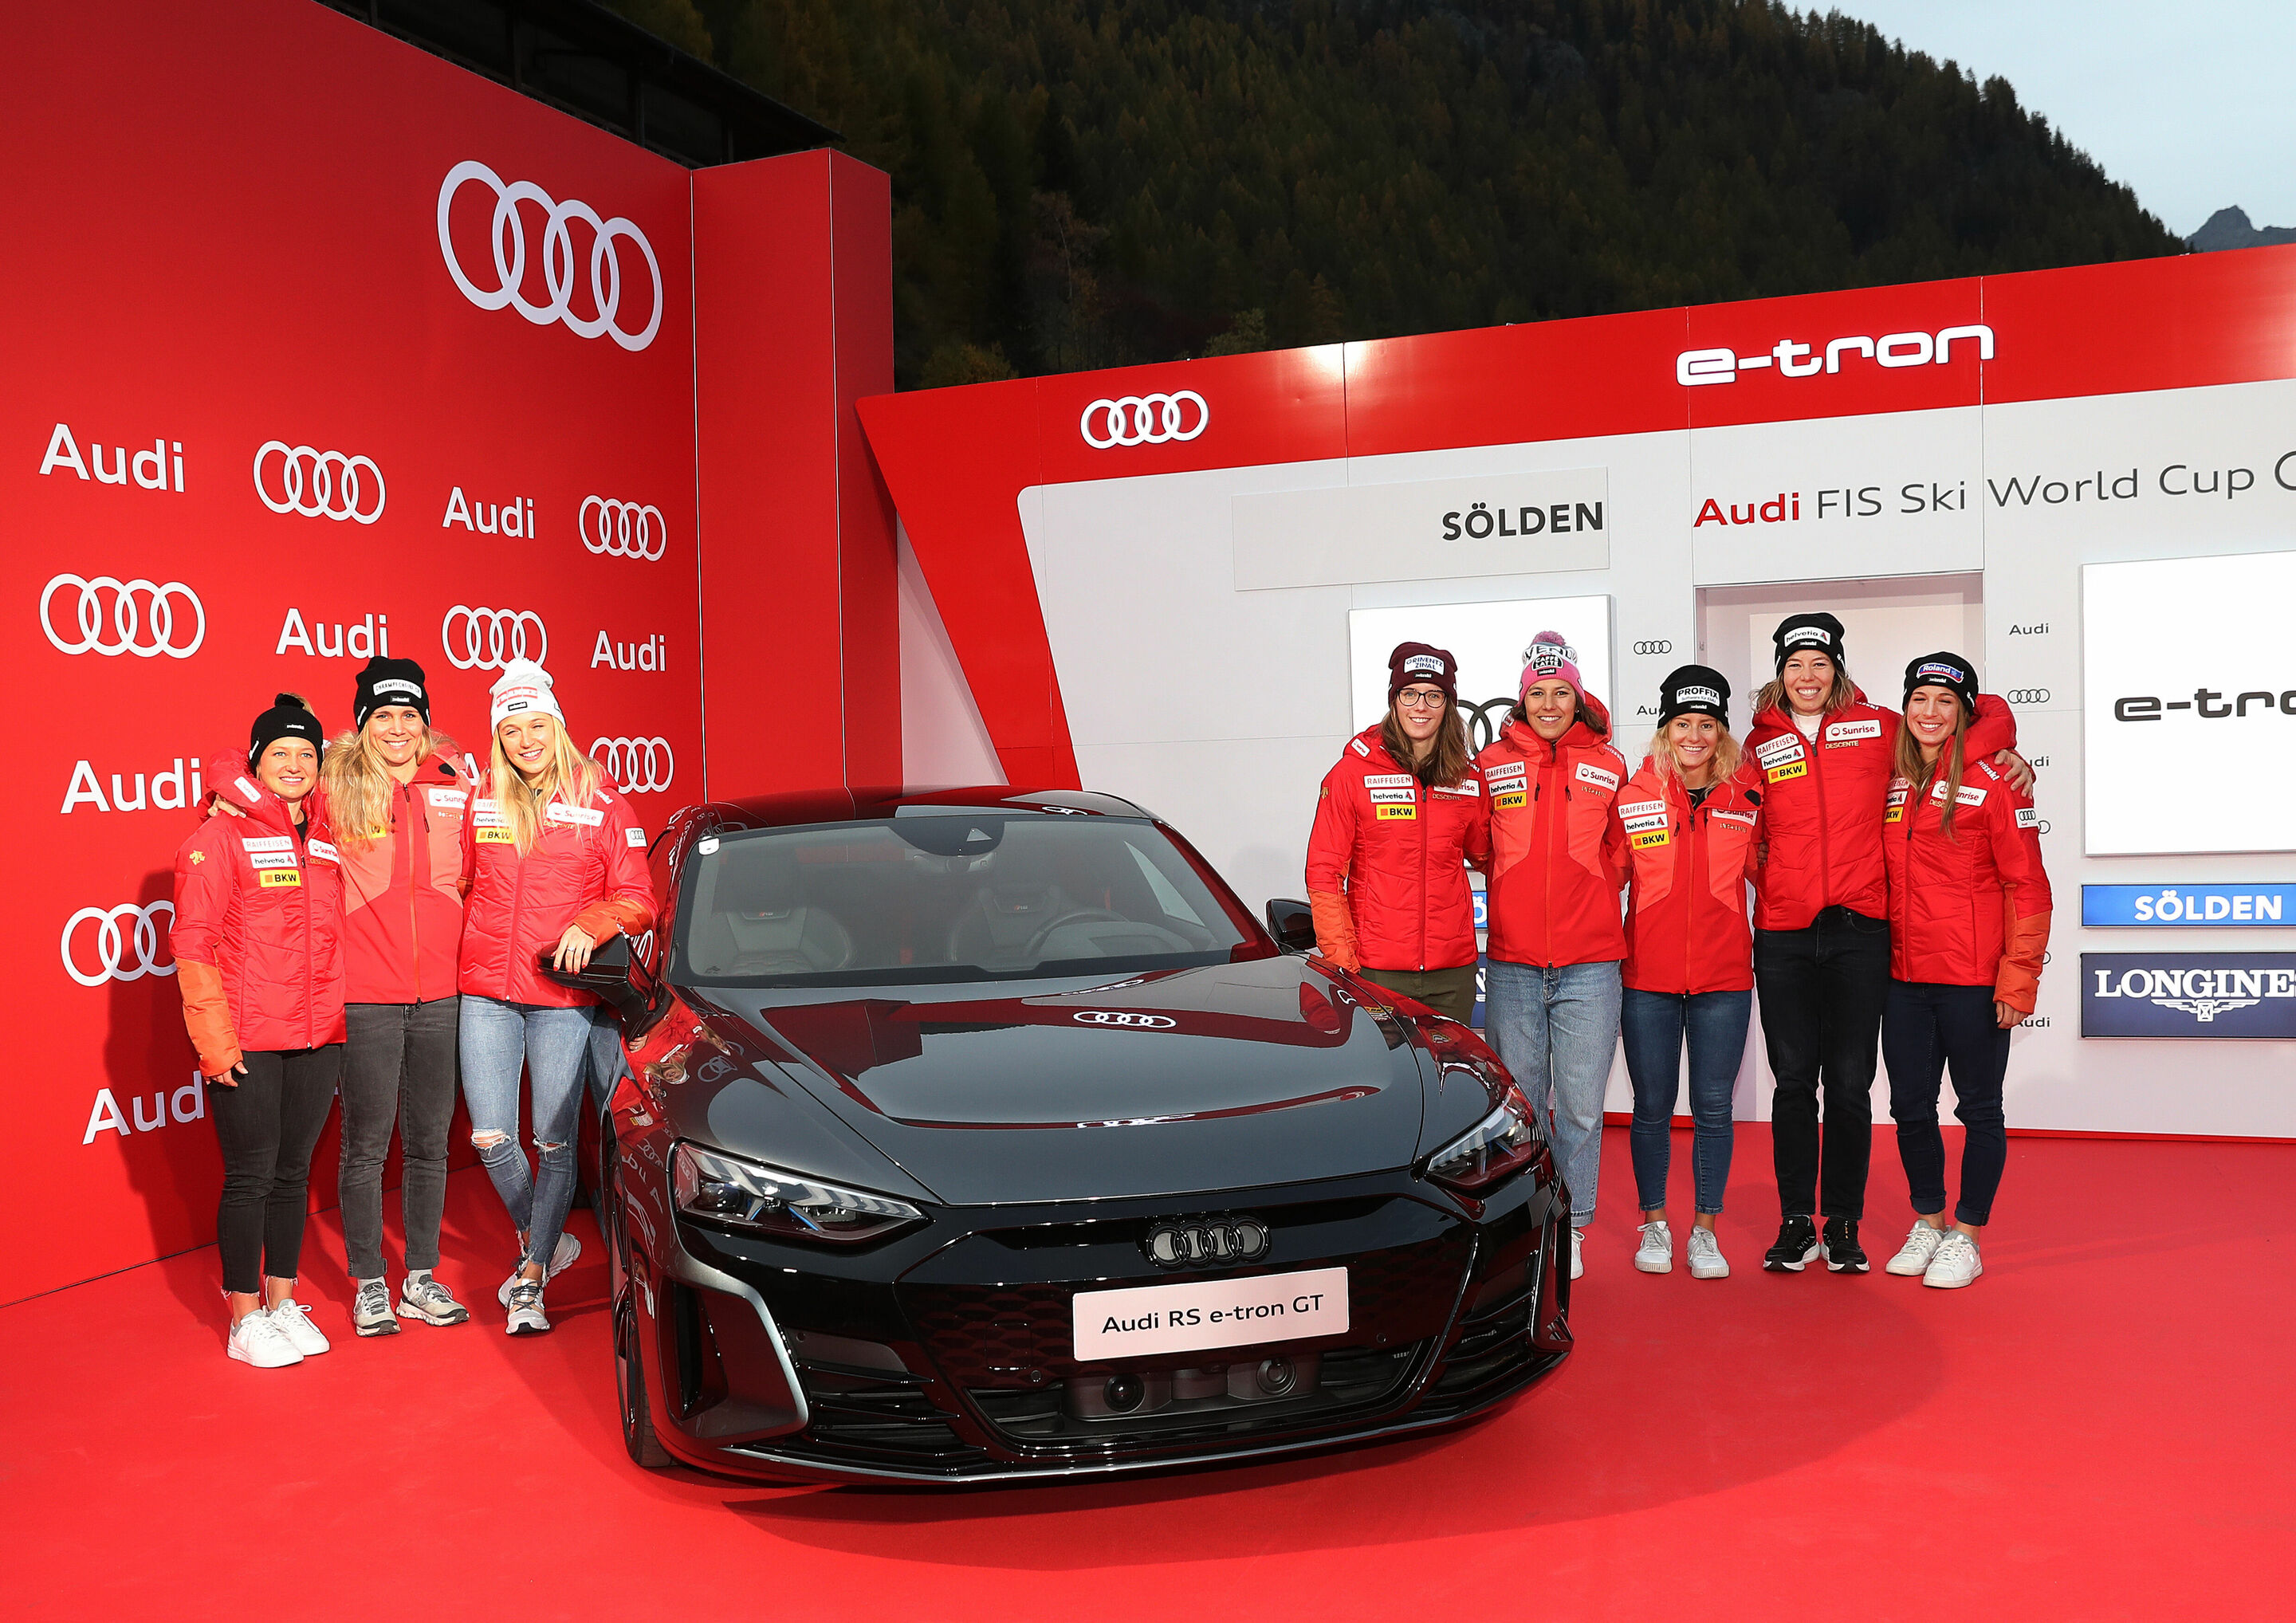 Partnership with FIS extended: Audi to shape Alpine Ski World Cup for four more years